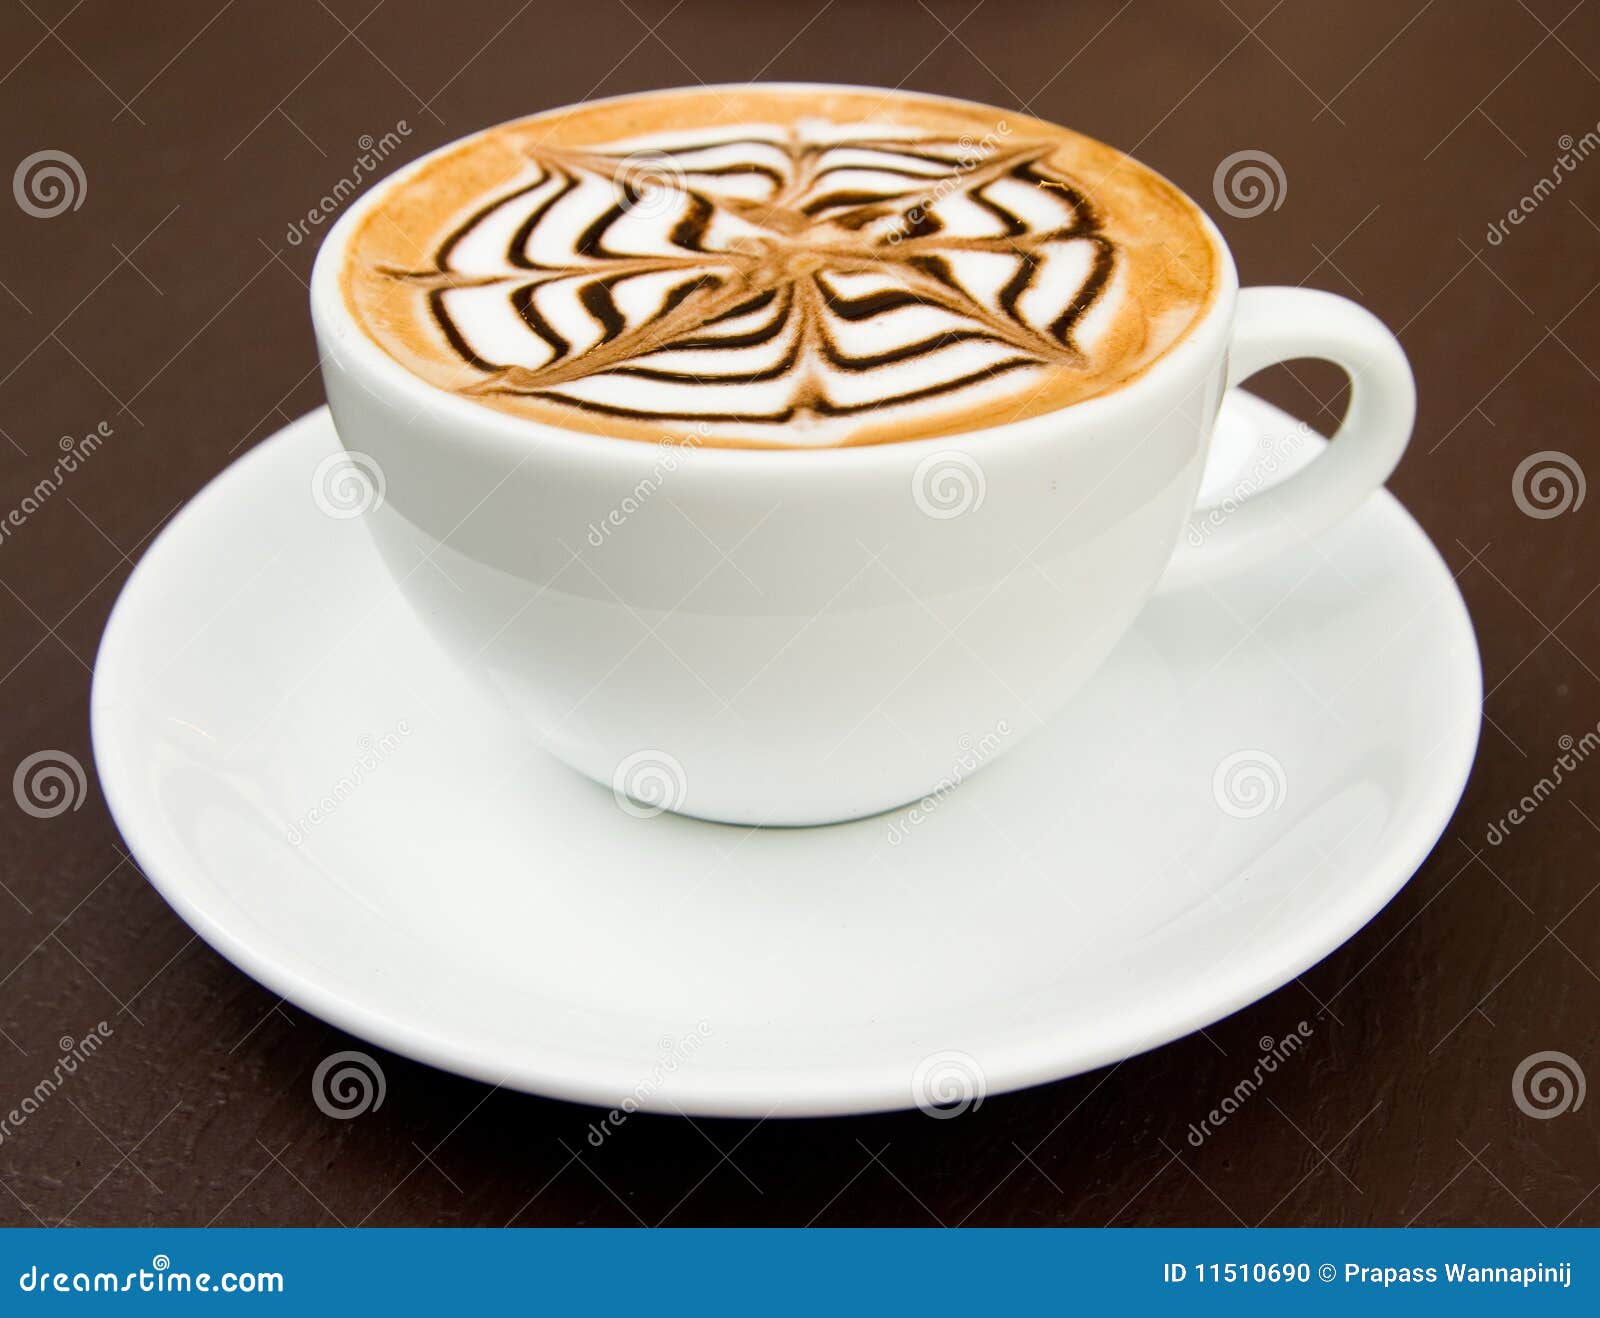 a cup of latte-art hot coffee